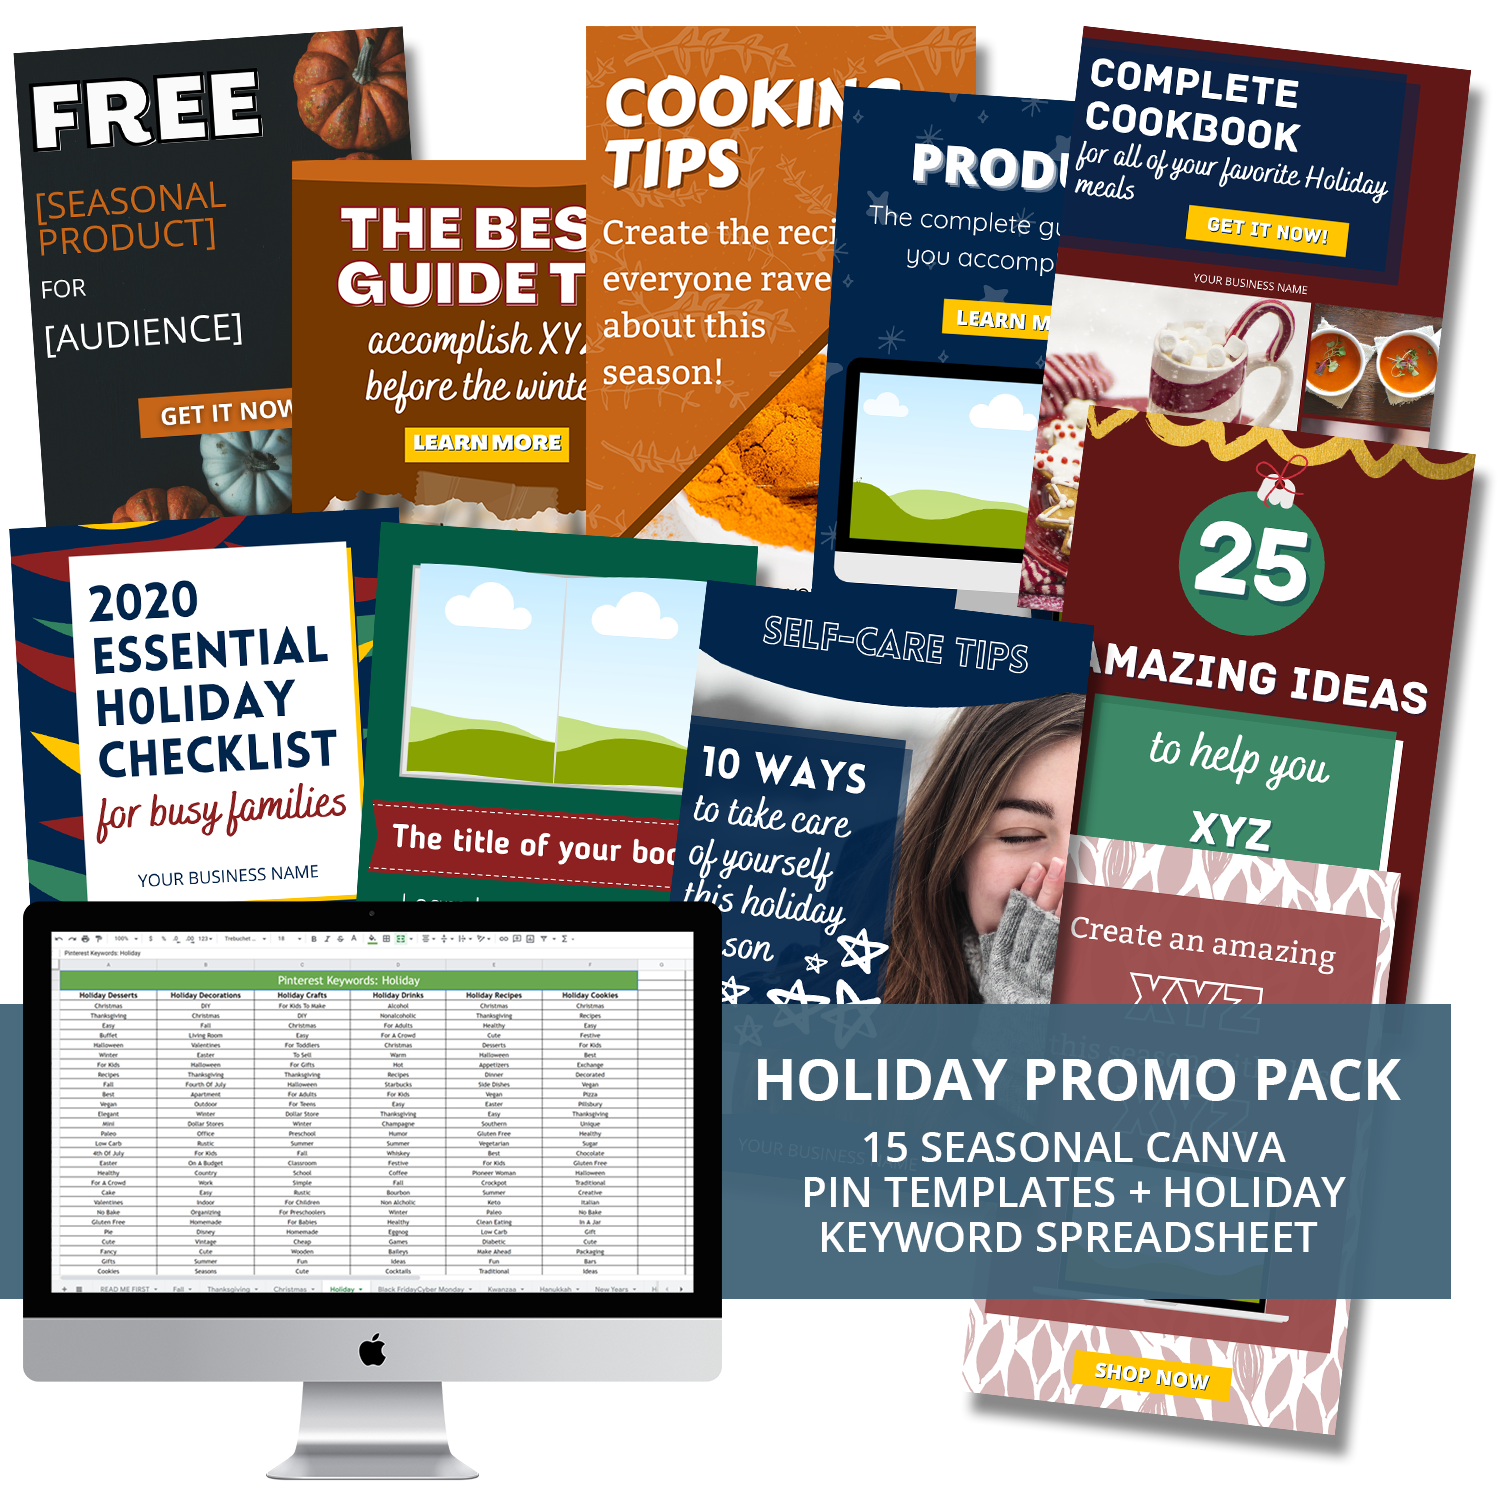 Holiday Promo Pack for Pinterest